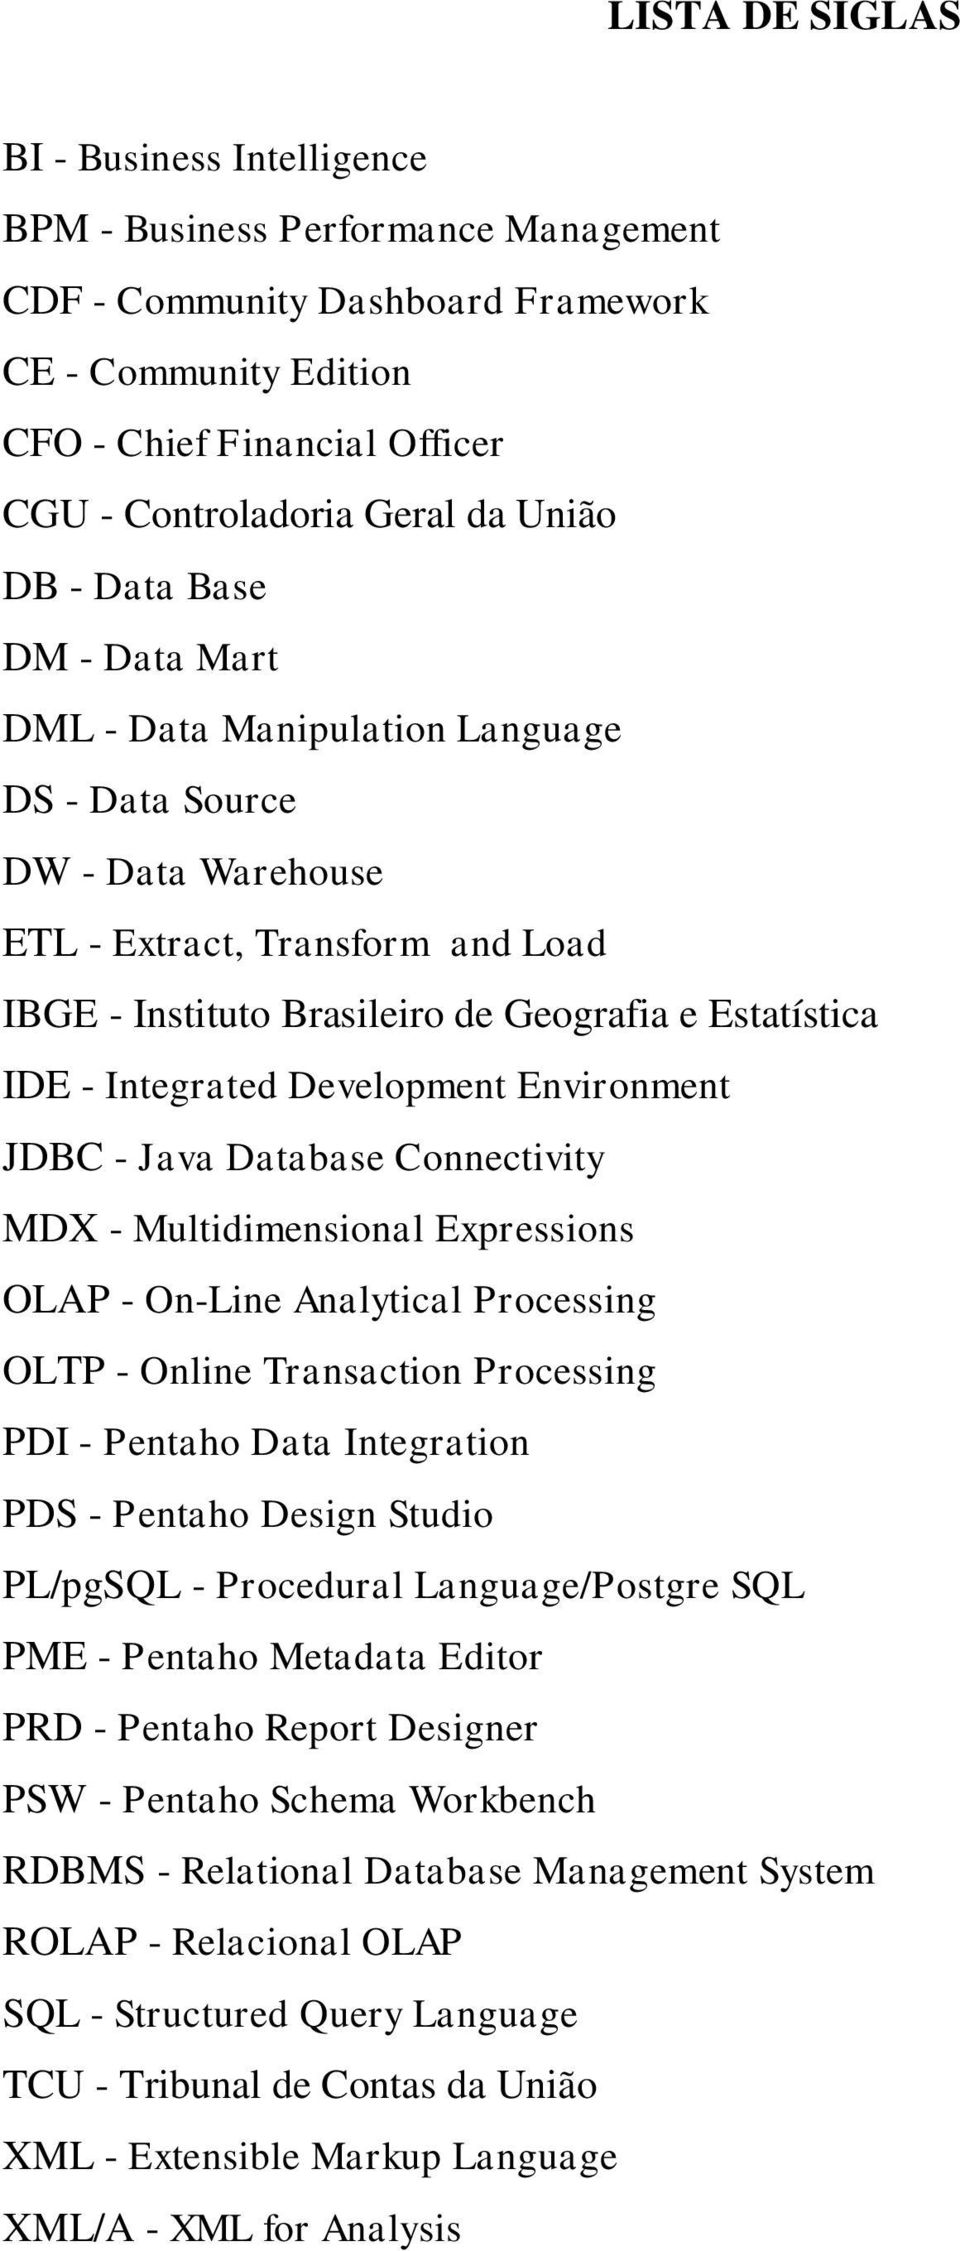 - Integrated Development Environment JDBC - Java Database Connectivity MDX - Multidimensional Expressions OLAP - On-Line Analytical Processing OLTP - Online Transaction Processing PDI - Pentaho Data